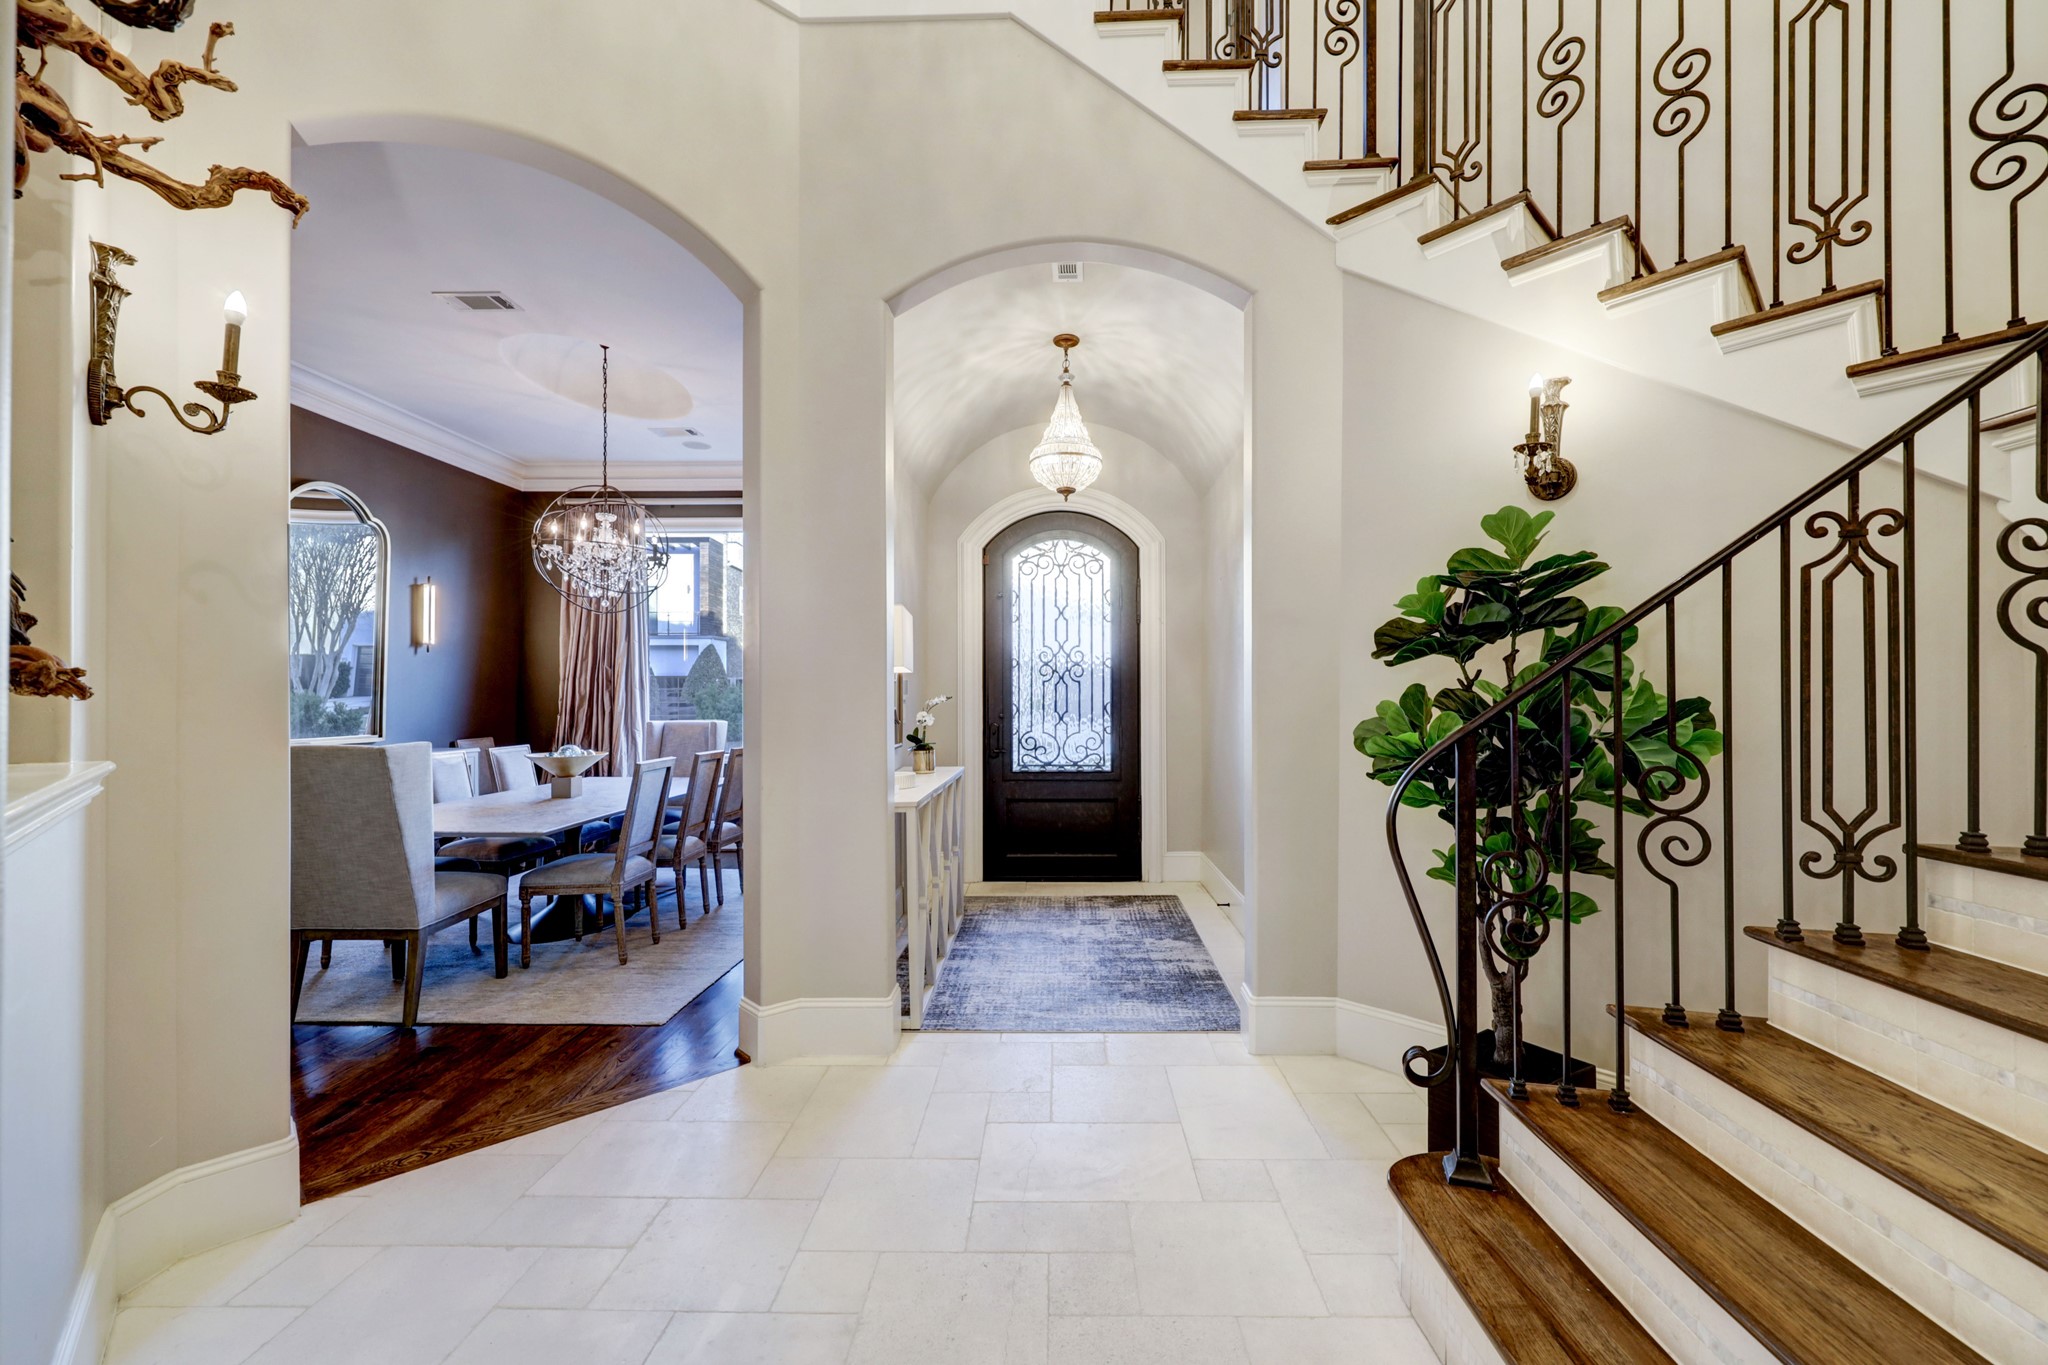 Gracious Foyer with two story ceiling and lighted staircase.